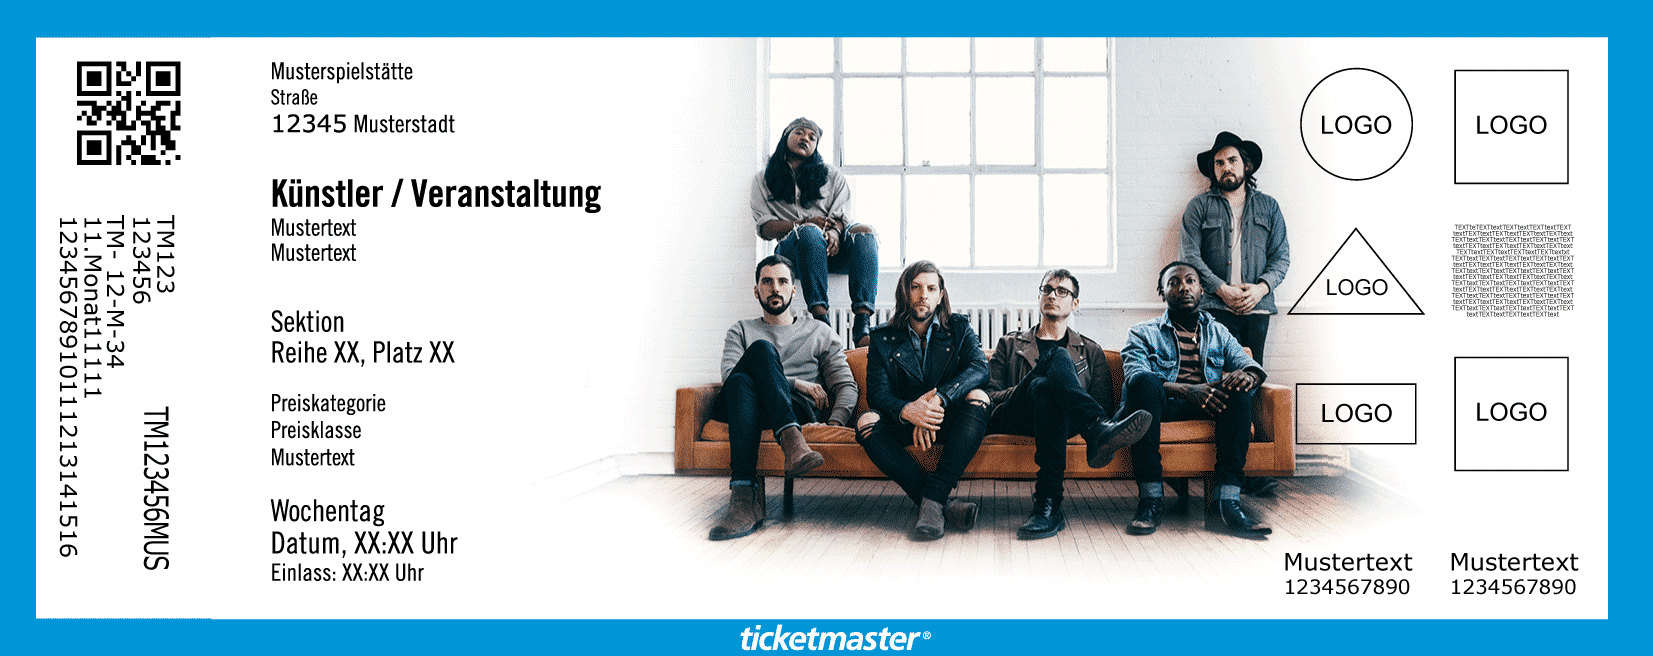 Welshly Arms Tickets Tour 2019